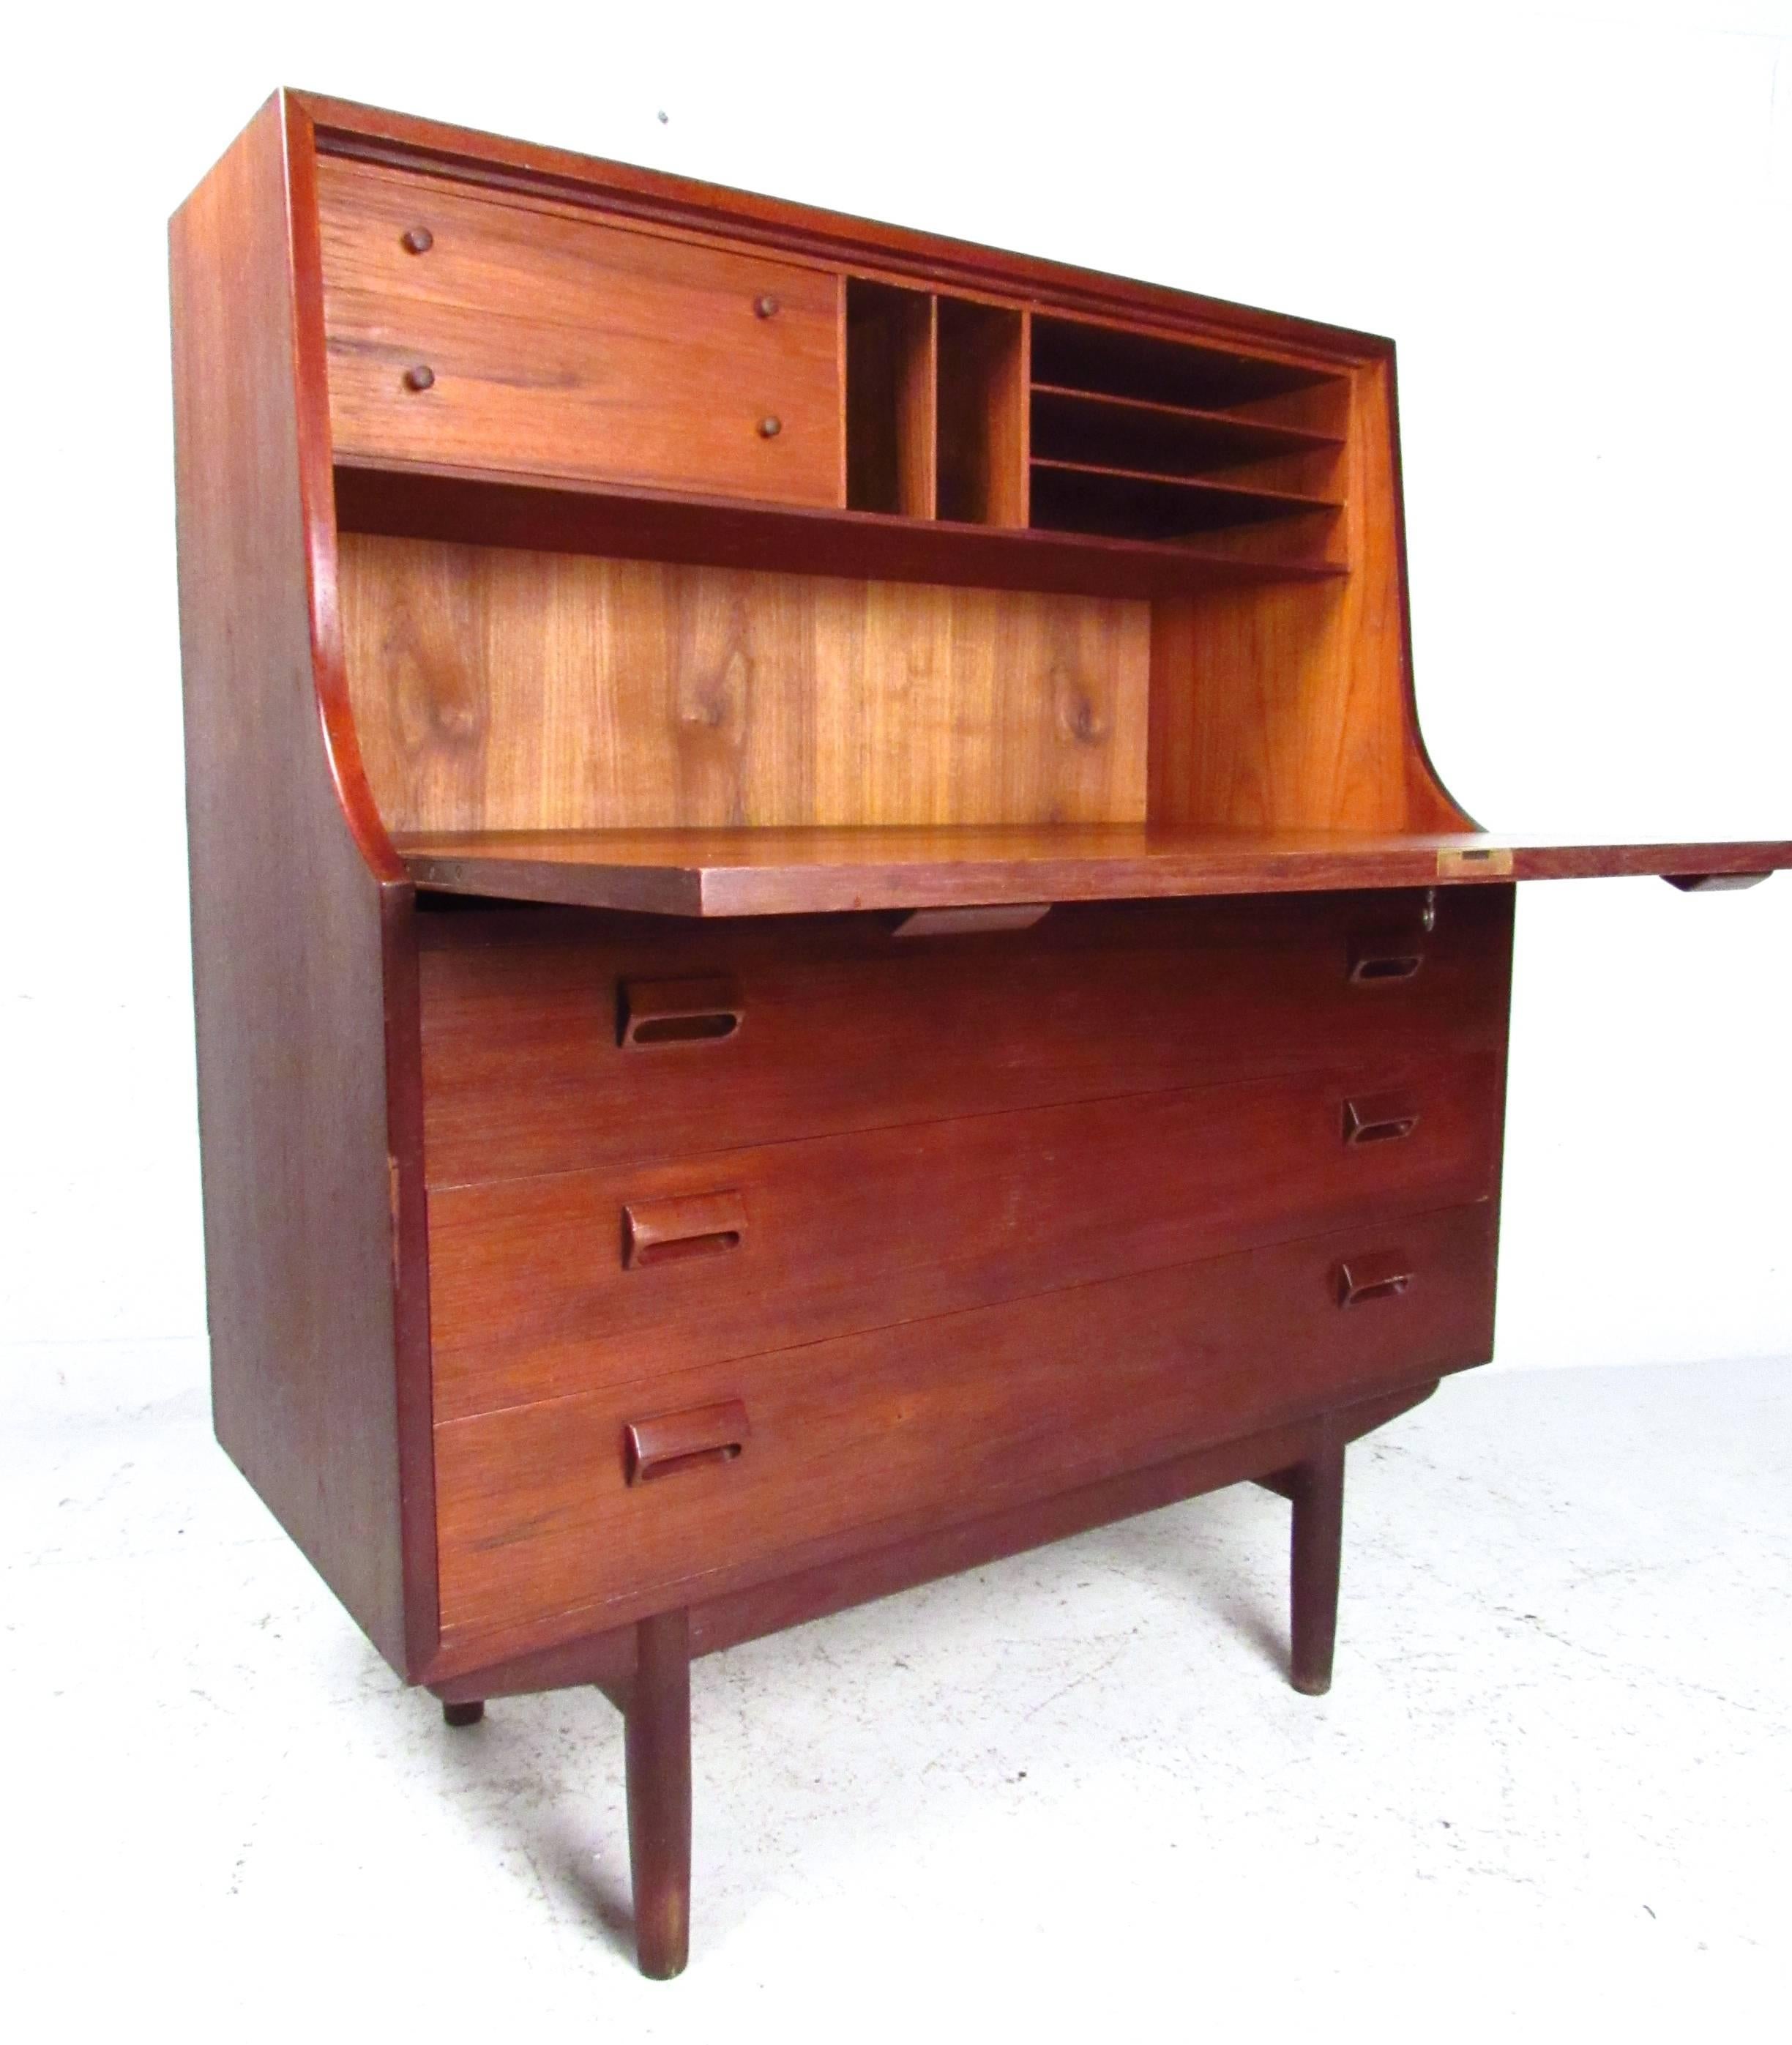 This unique Børge Mogensen style secretary desk offers a combination of workspace and storage, making an ideal addition to settings short on space. Plenty of room for organization and paperwork, this vintage teak secretary is a great addition to